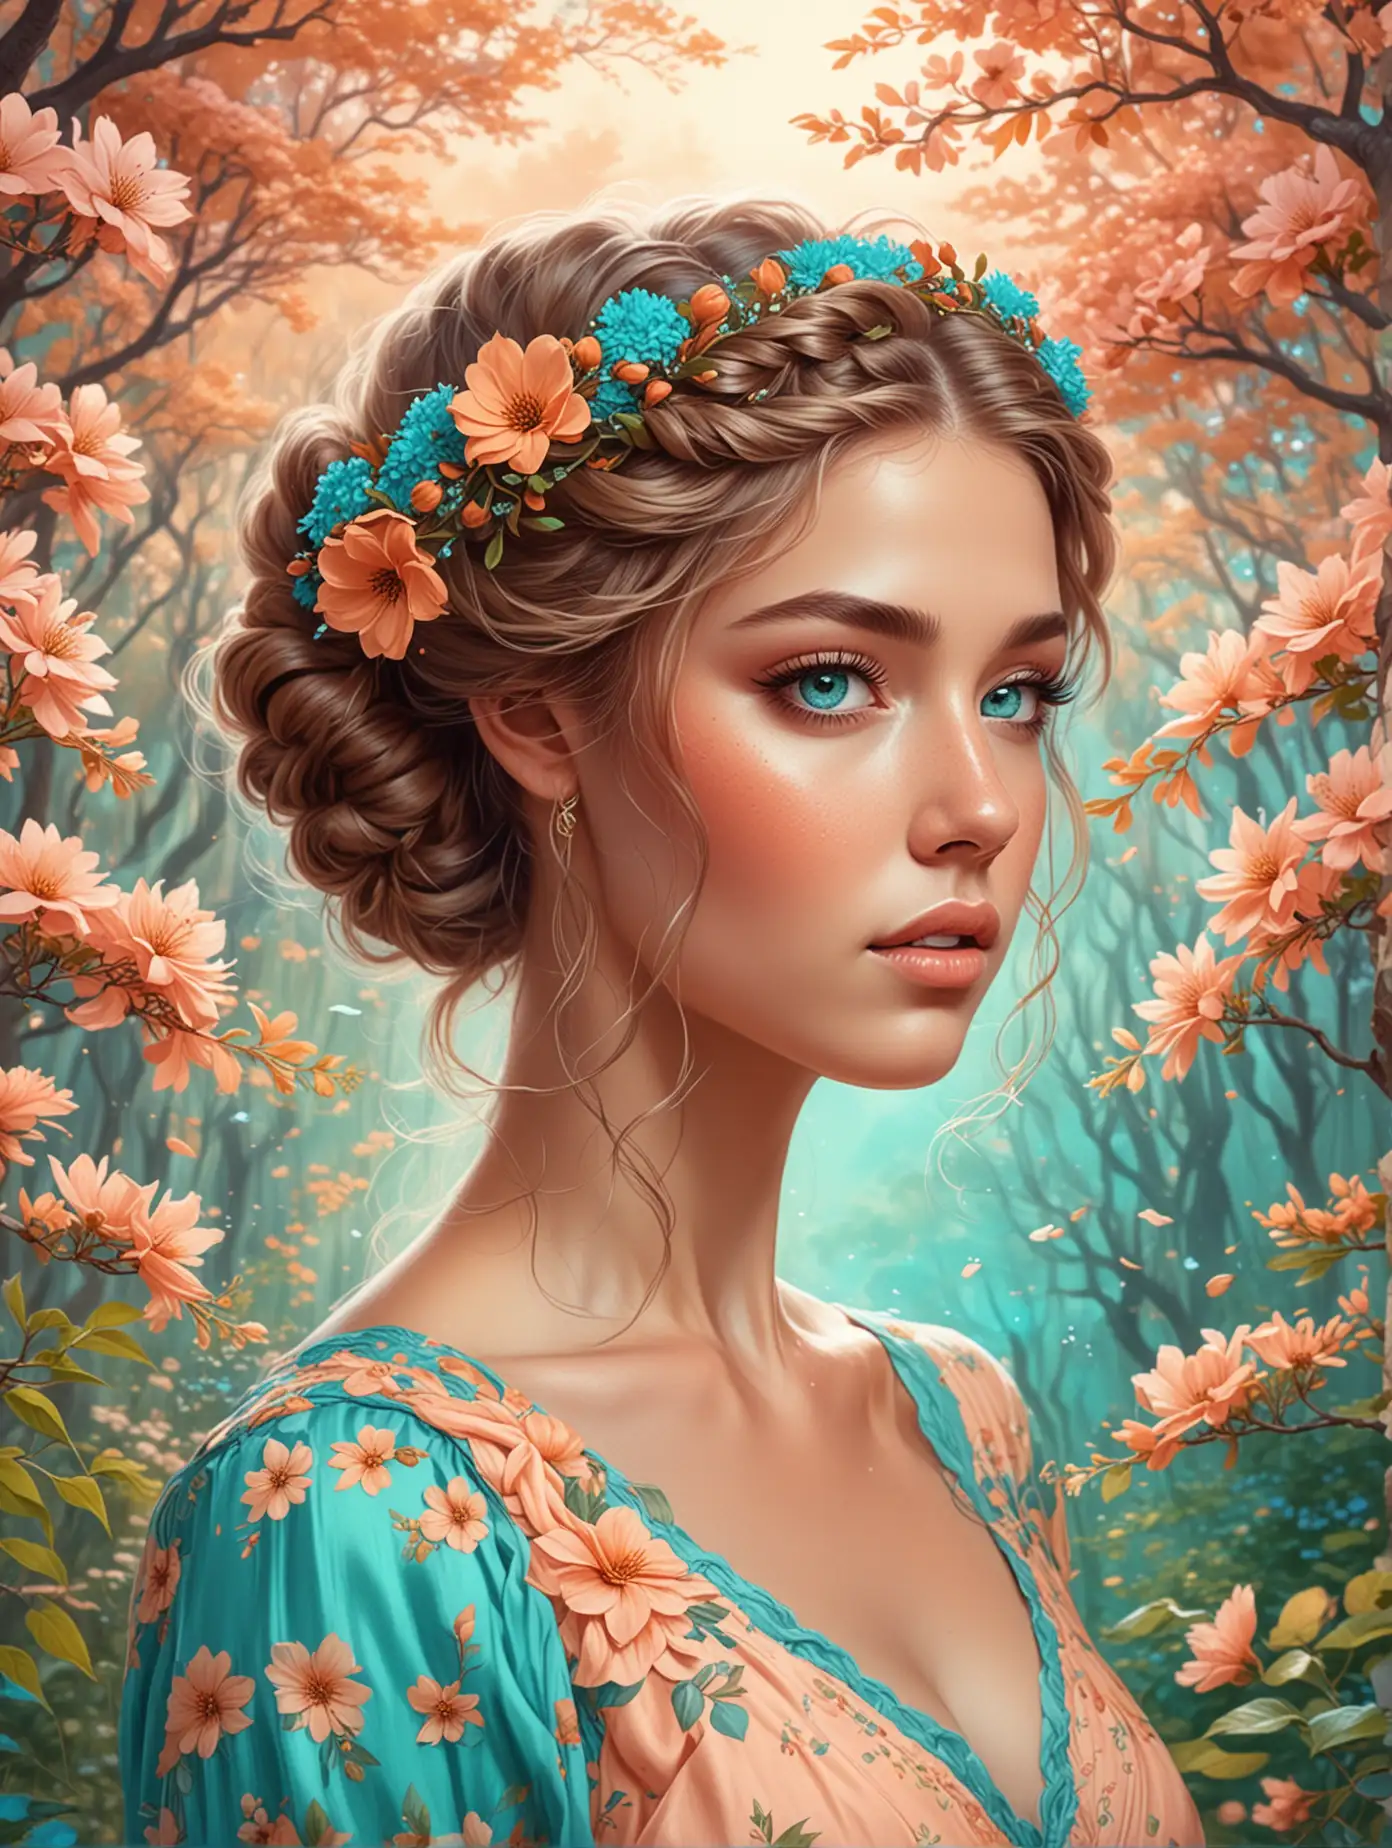 Illustration of a beautiful woman as mother nature in the forest, turquoise eyes, flowers in her braided hair, flowers overlay, peach-colored flowers, peach-colored dress, trees, flowers, turquoise sky, view from the side, close up